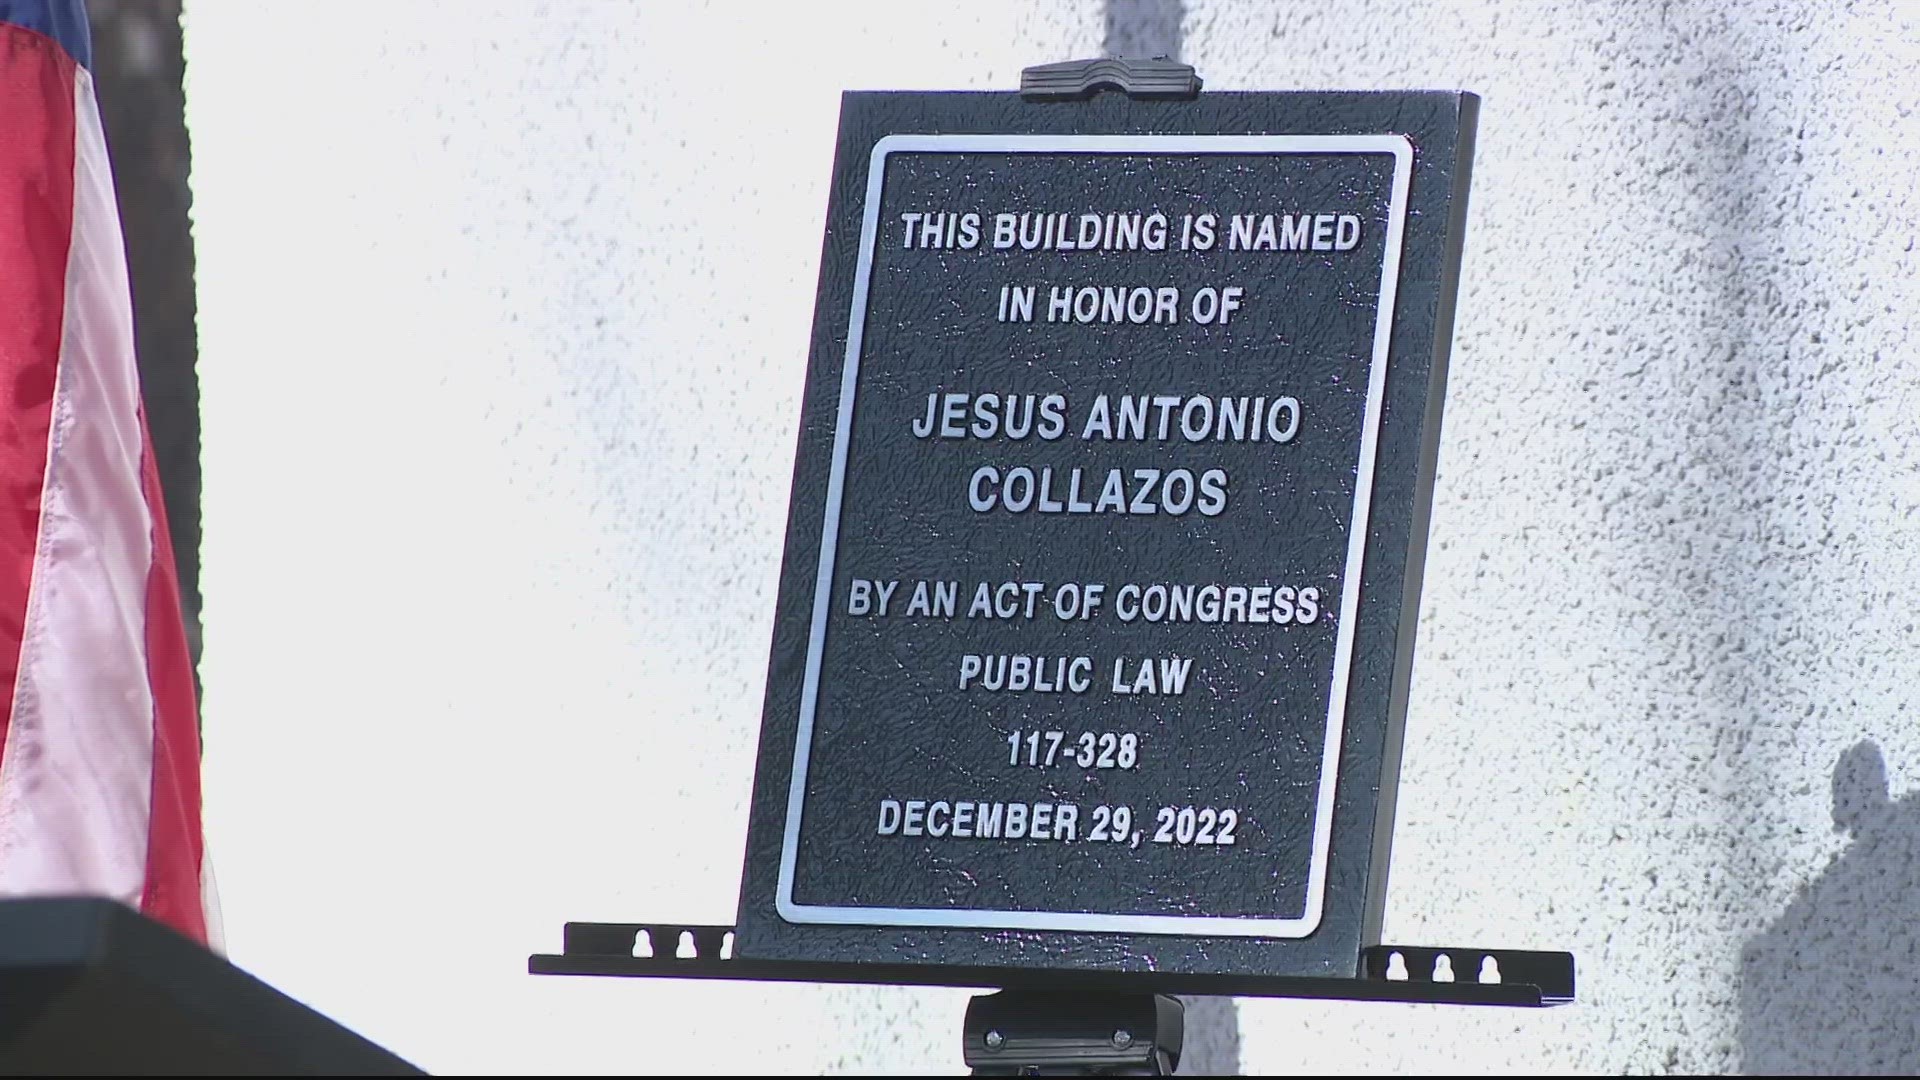 Jesus Collazos worked at the Arlington post office on George Mason Drive for 25 years.